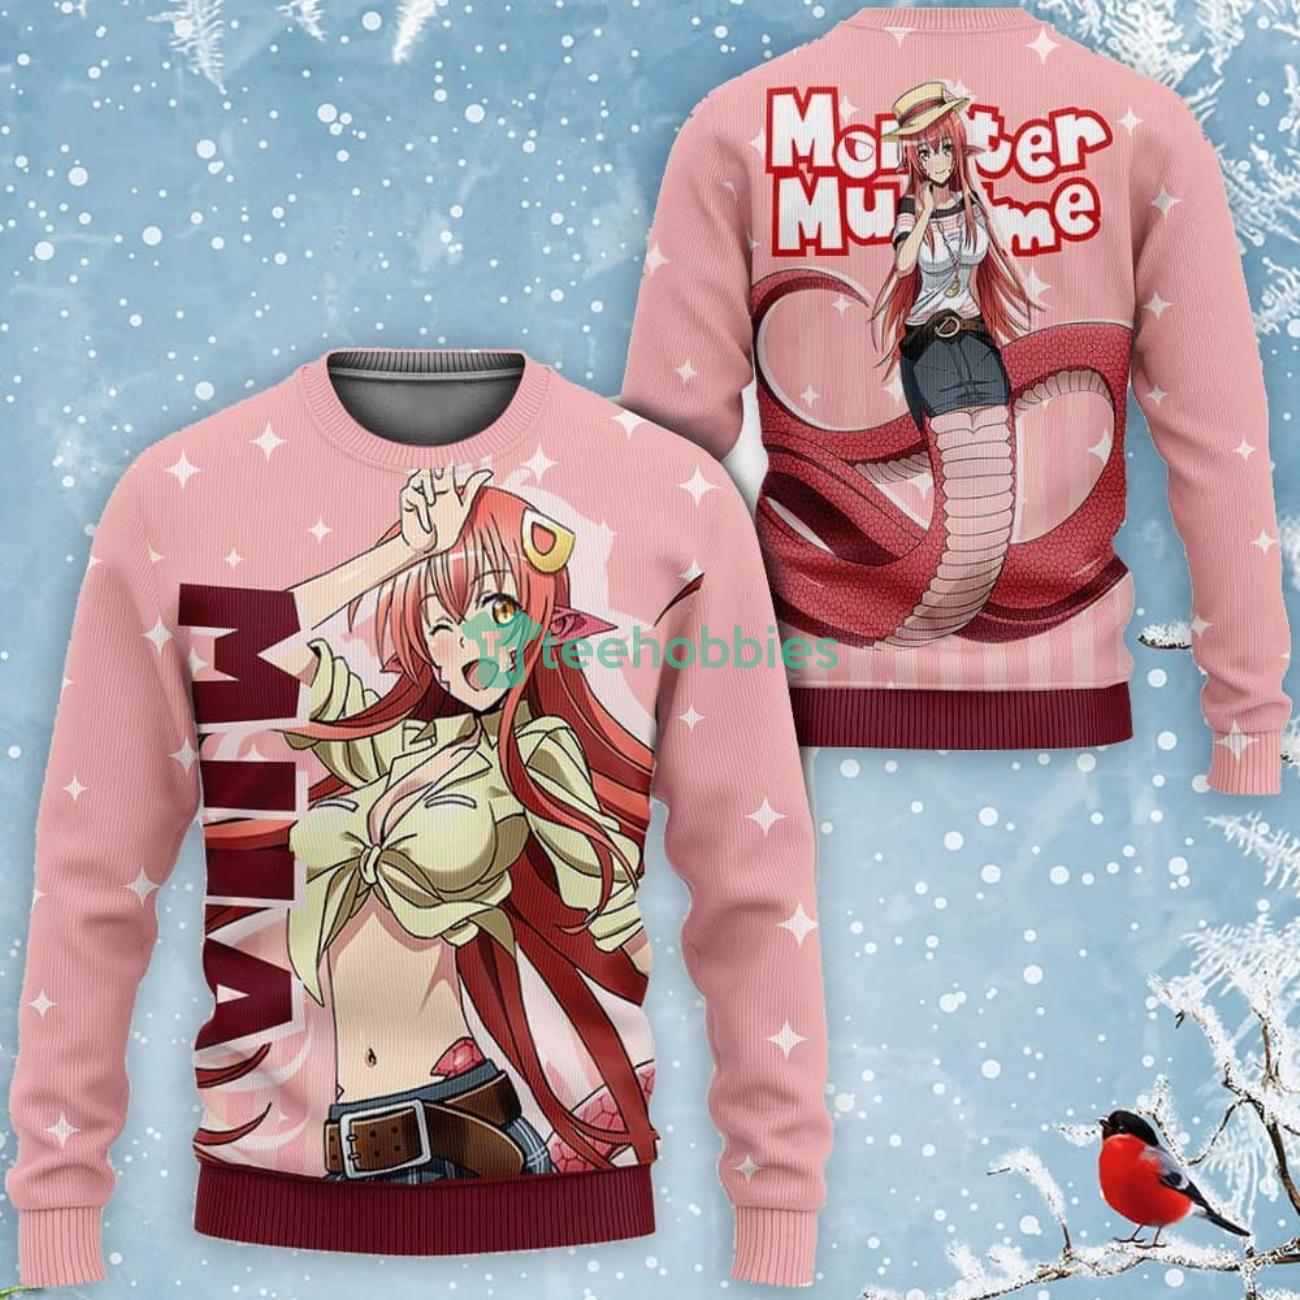 Monster Musume Miia All Over Printed 3D Shirt Custom Anime Fans Product Photo 2 Product photo 2